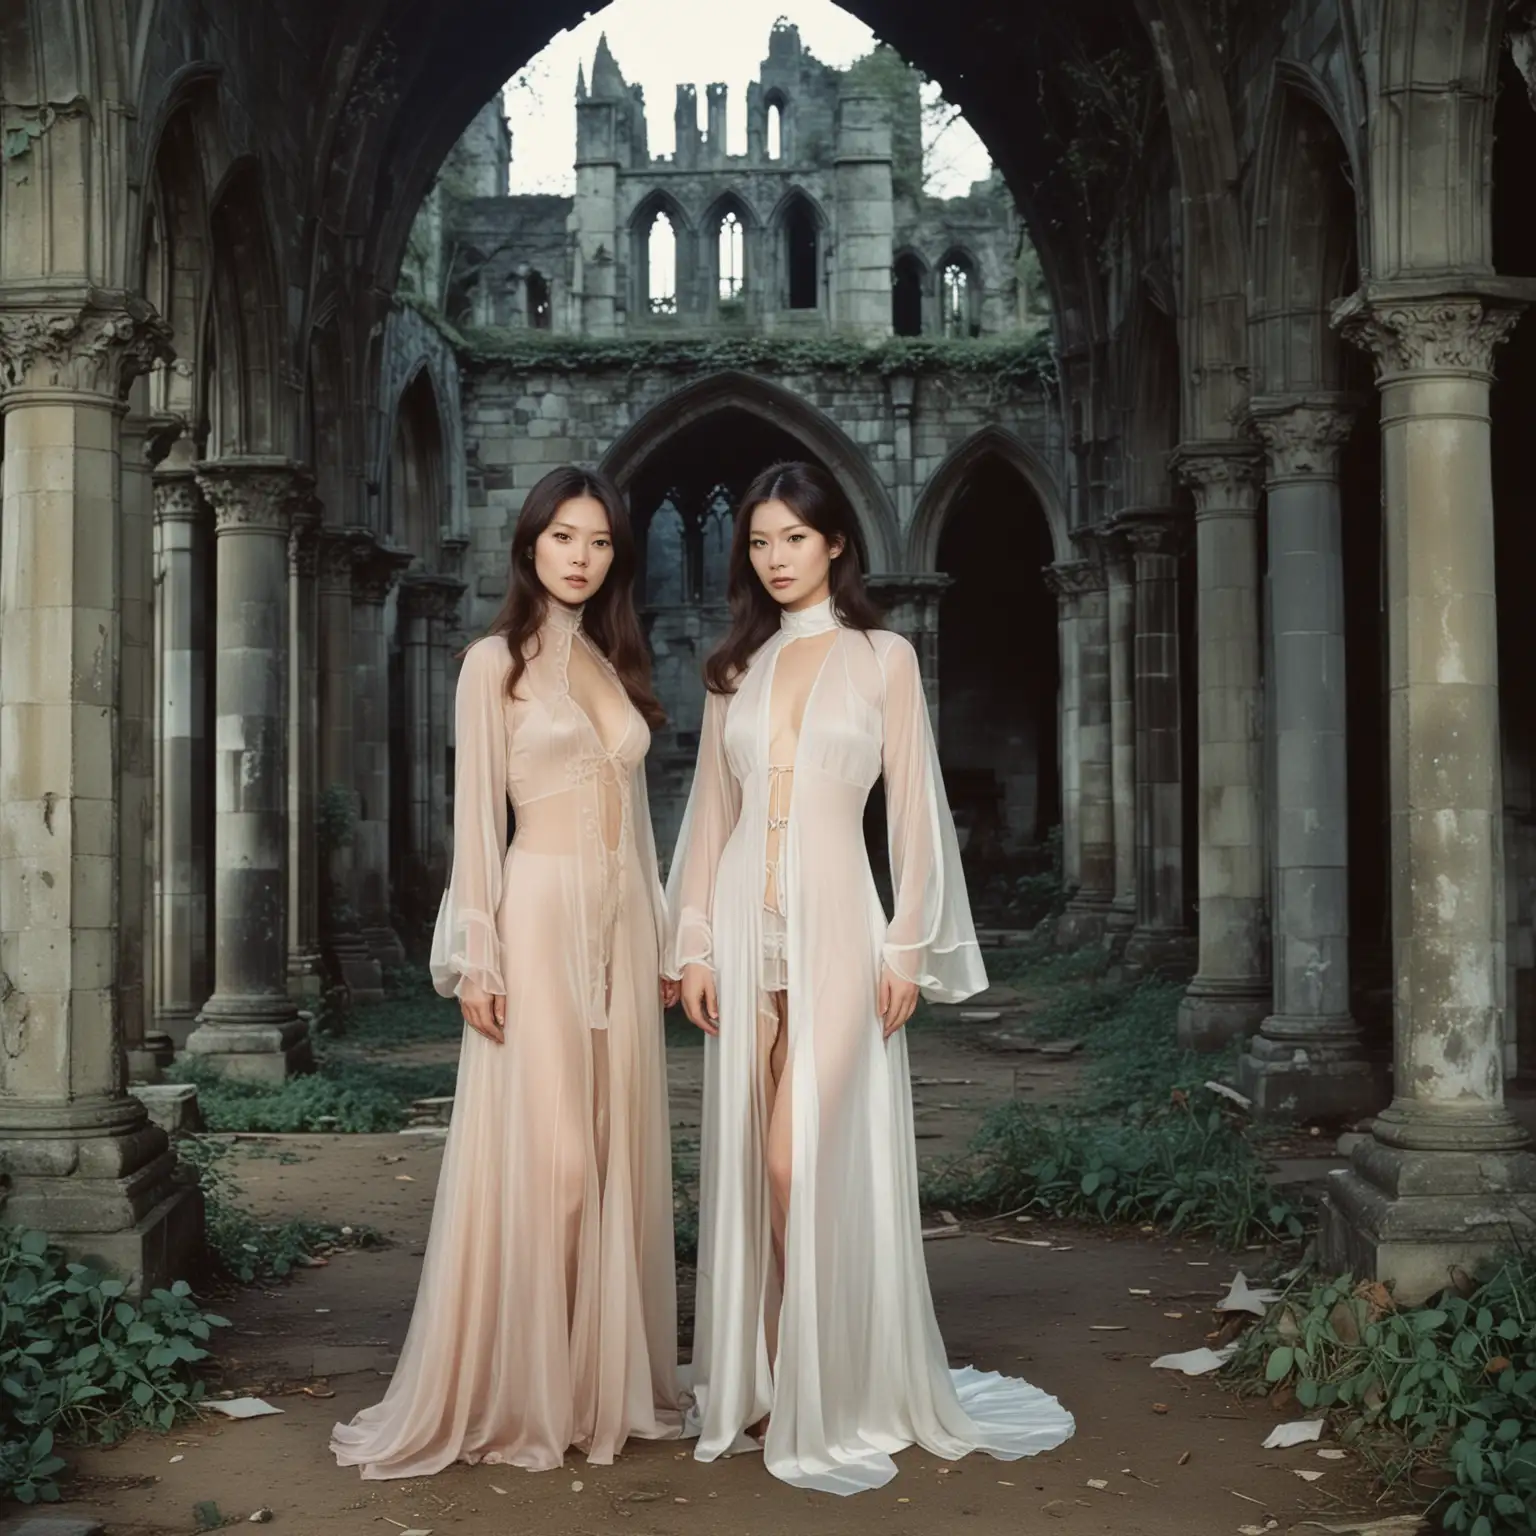 Sensual Japanese Sisters in Translucent Silk Gowns at Ruined Gothic Abbey